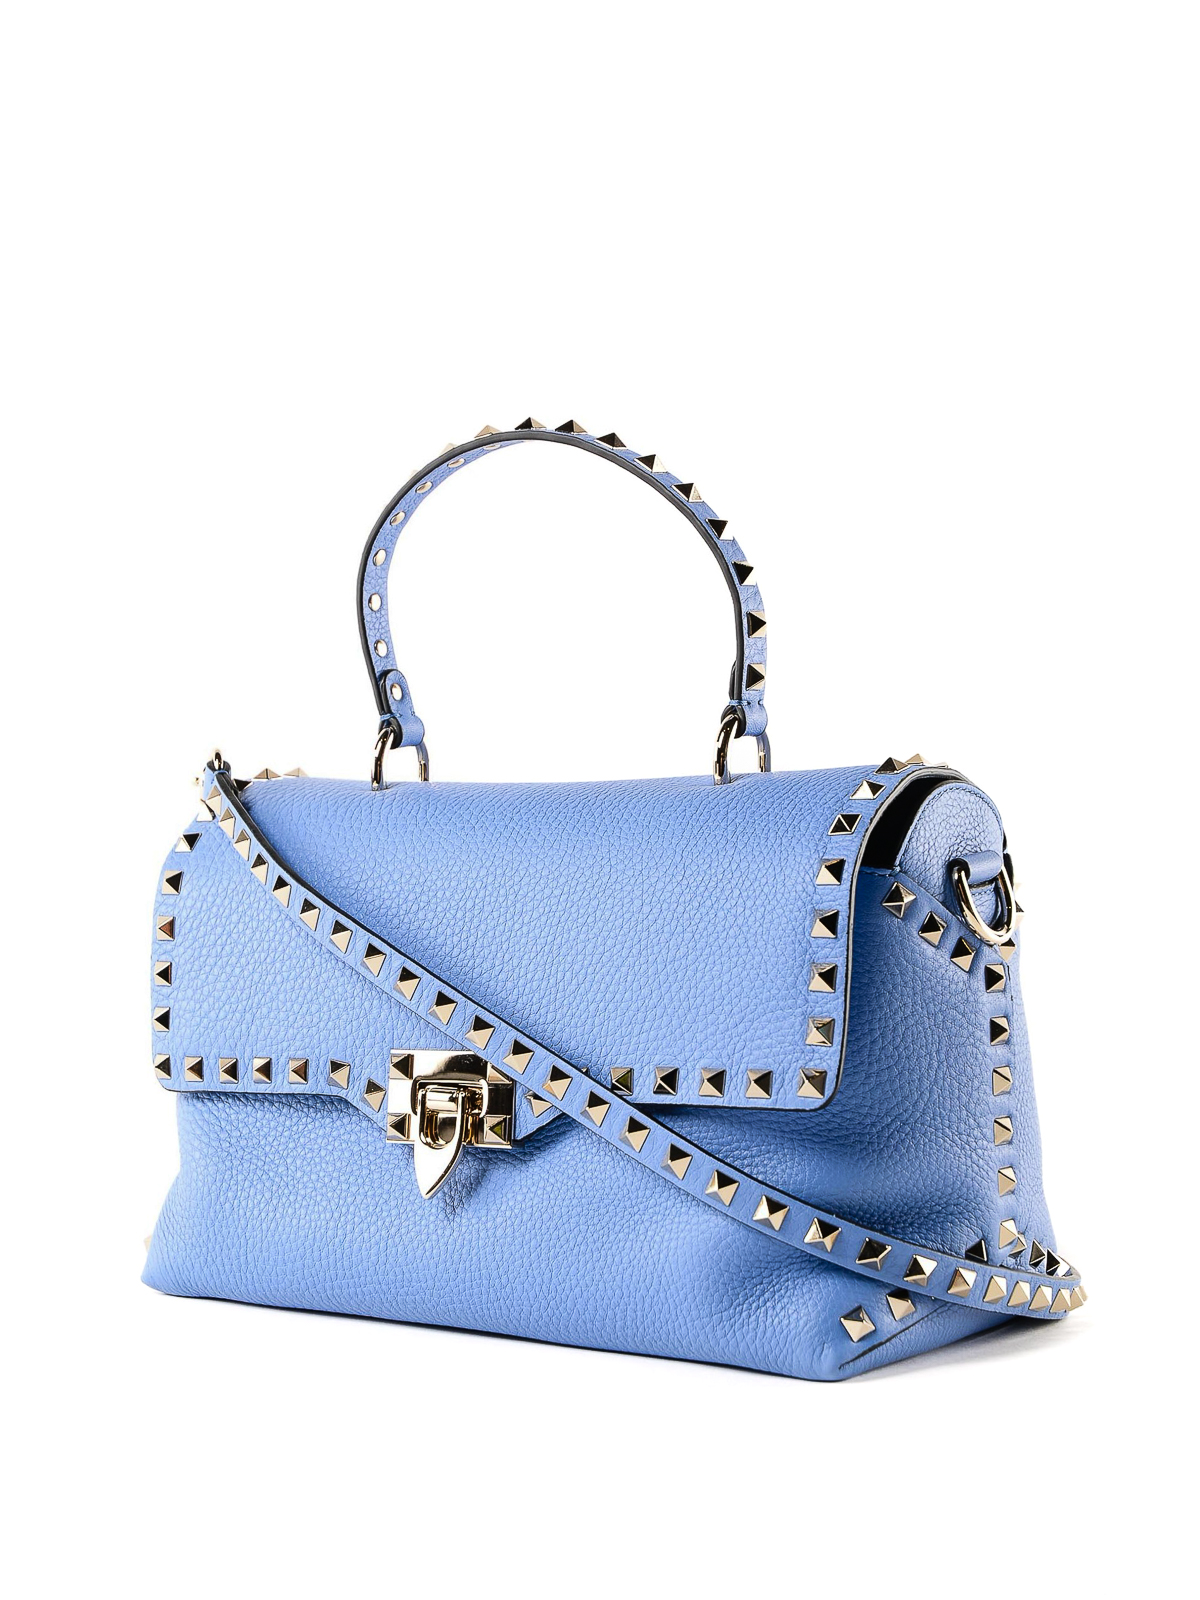 Totes bags Valentino - blue leather tote bag - RW2B0D16VSLGY7